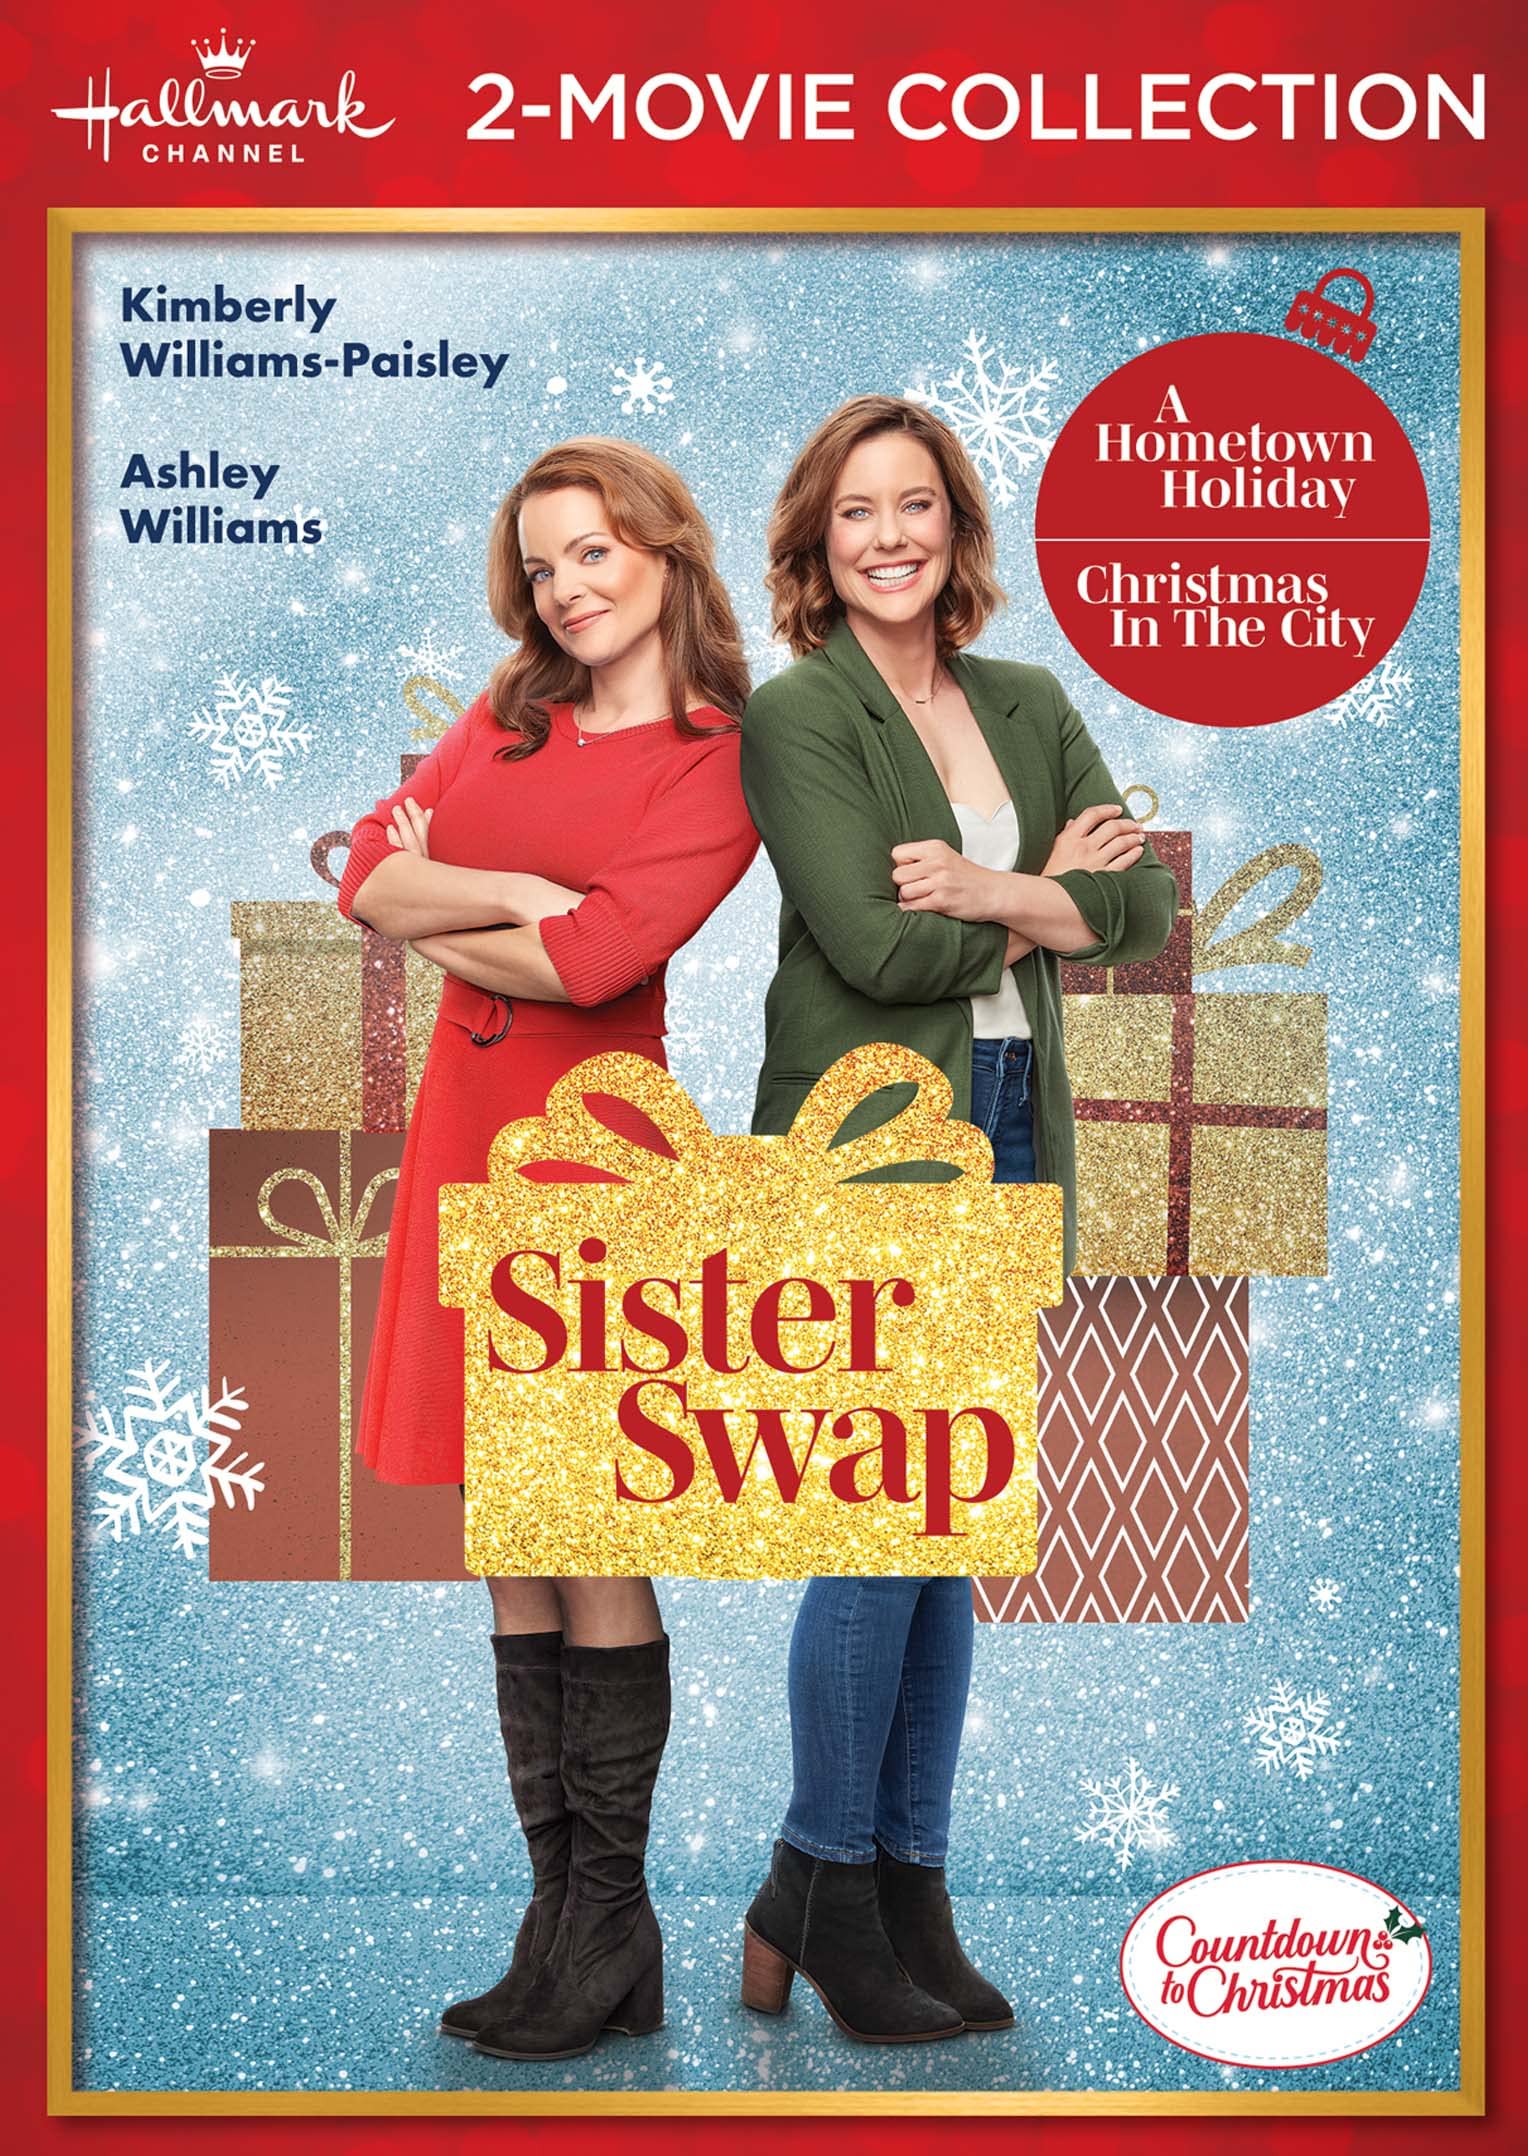 Hallmark 2-Movie Collection: Sister Swap: A Hometown Holiday & Sister Swap: Christmas in the City [Region Free] on MovieShack